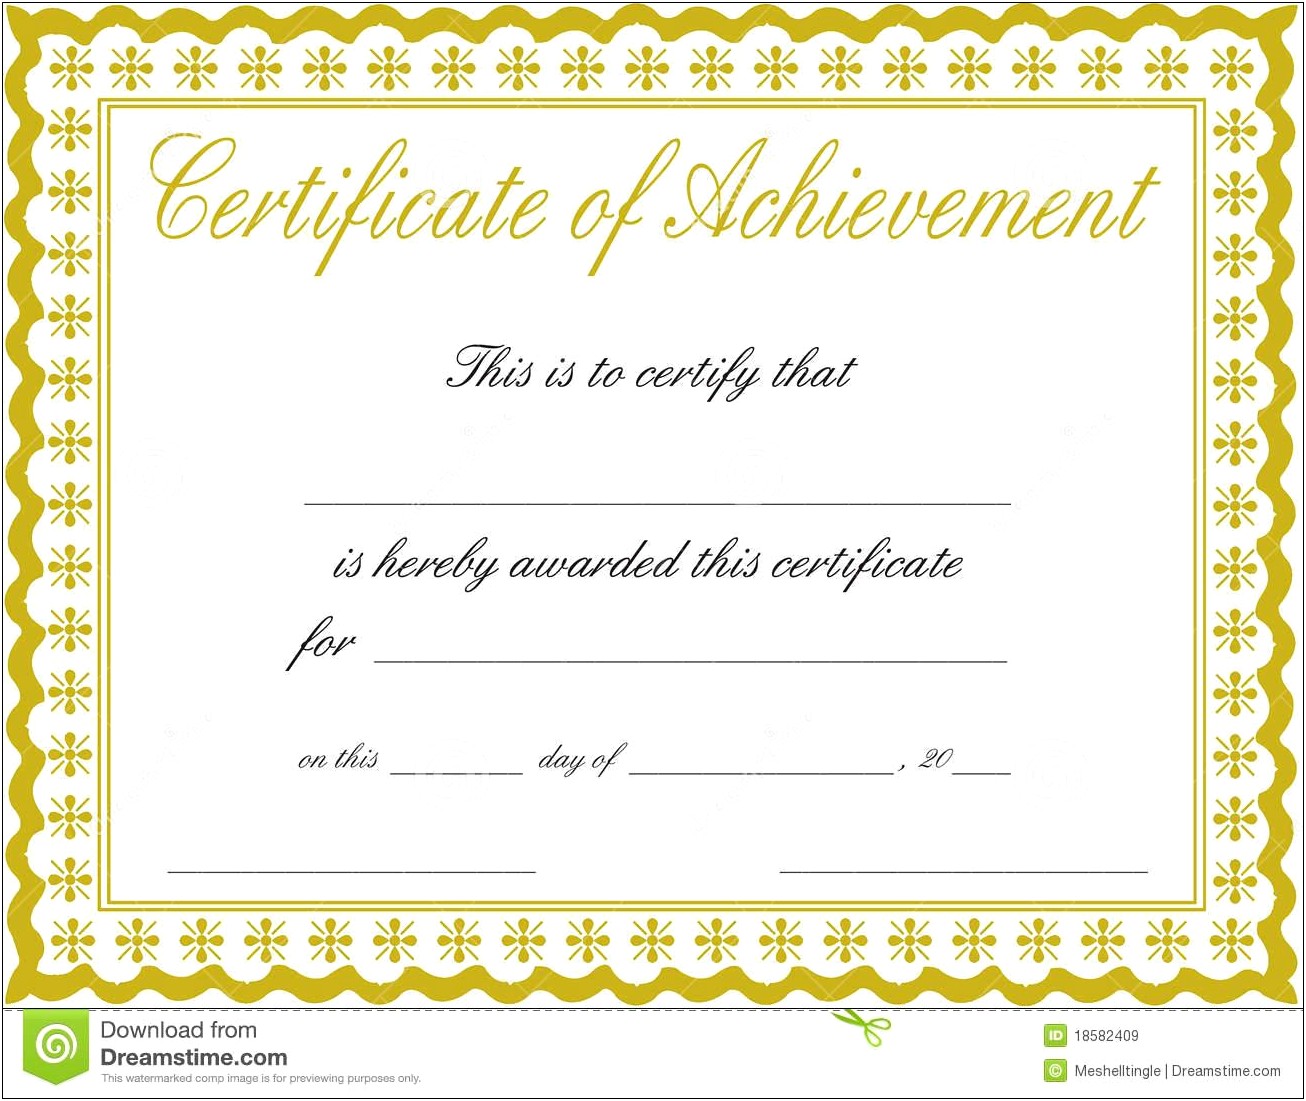 Free Downloadable Certificate Of Achievement Templates